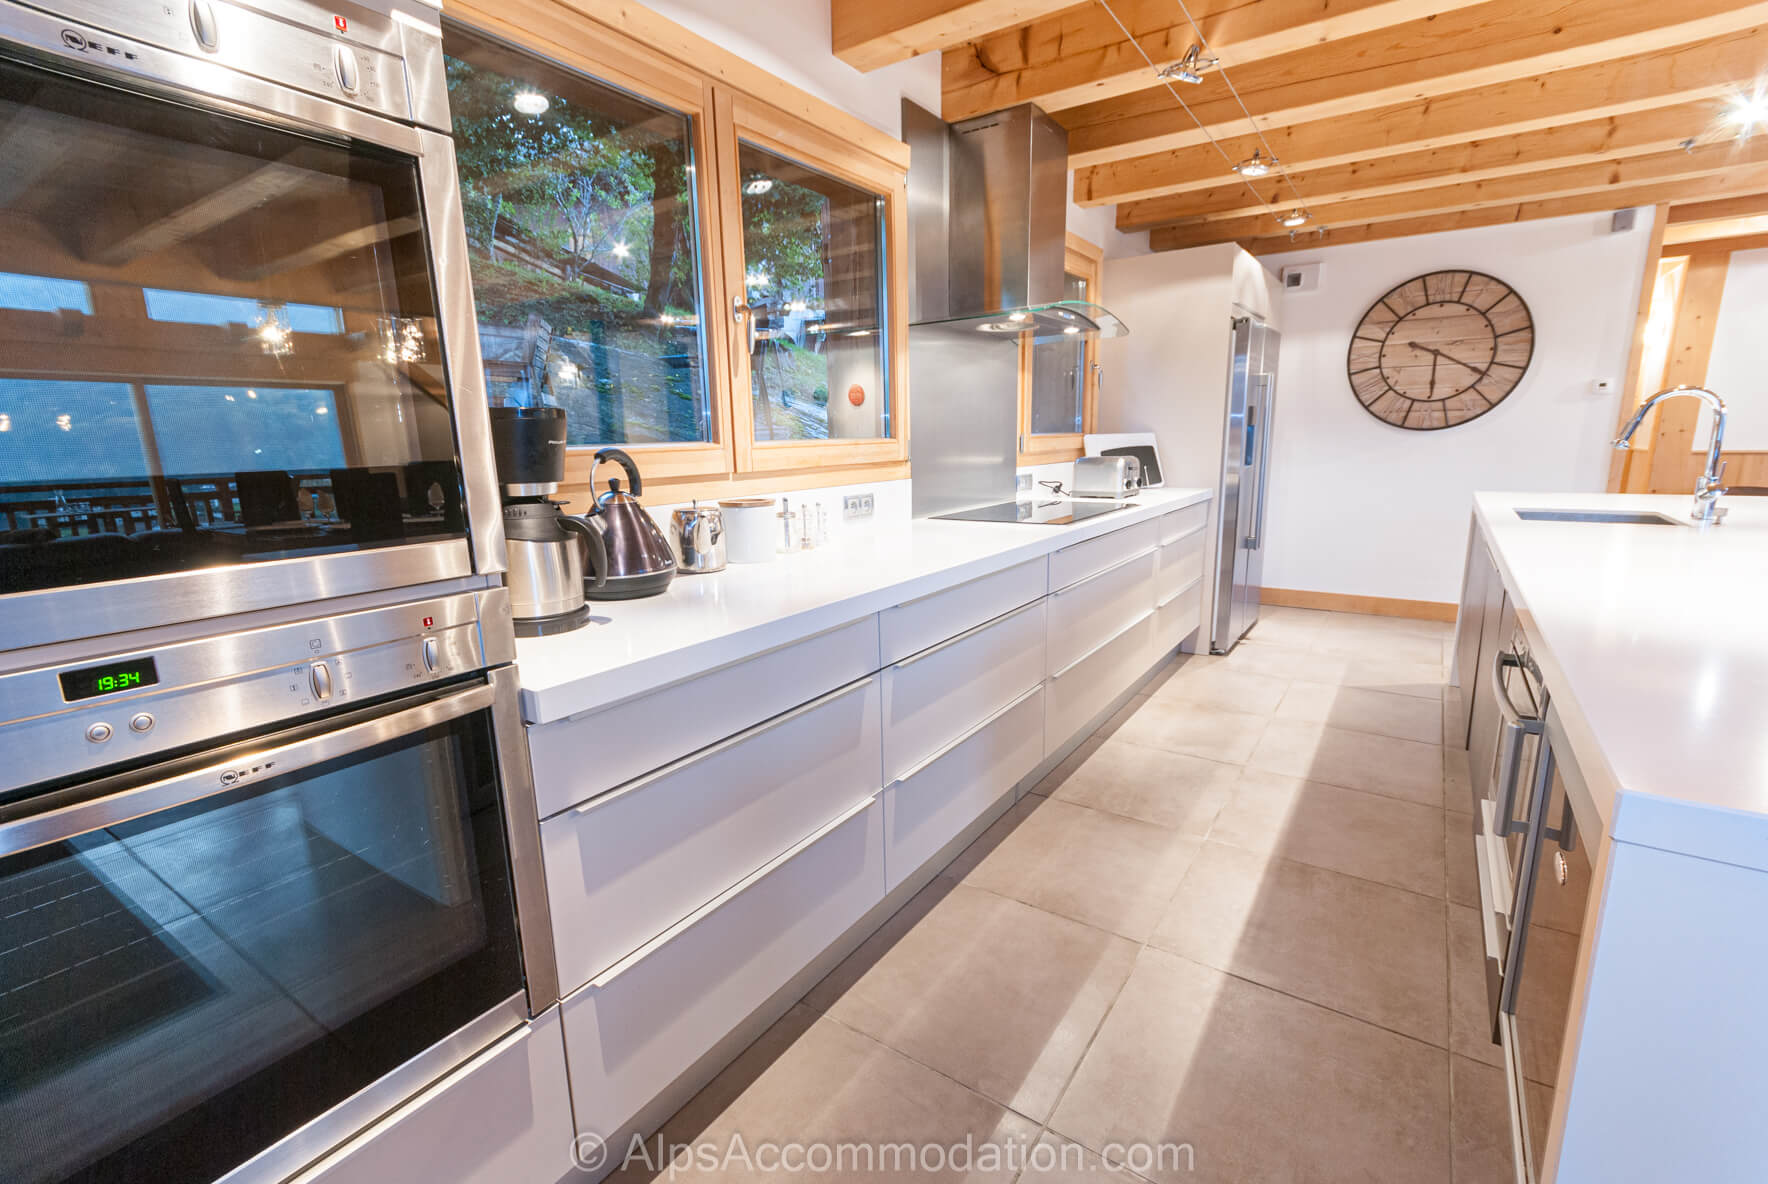 Chalet Foehn Samoëns - Cooking for a chalet is a breeze in the enormous kitchen